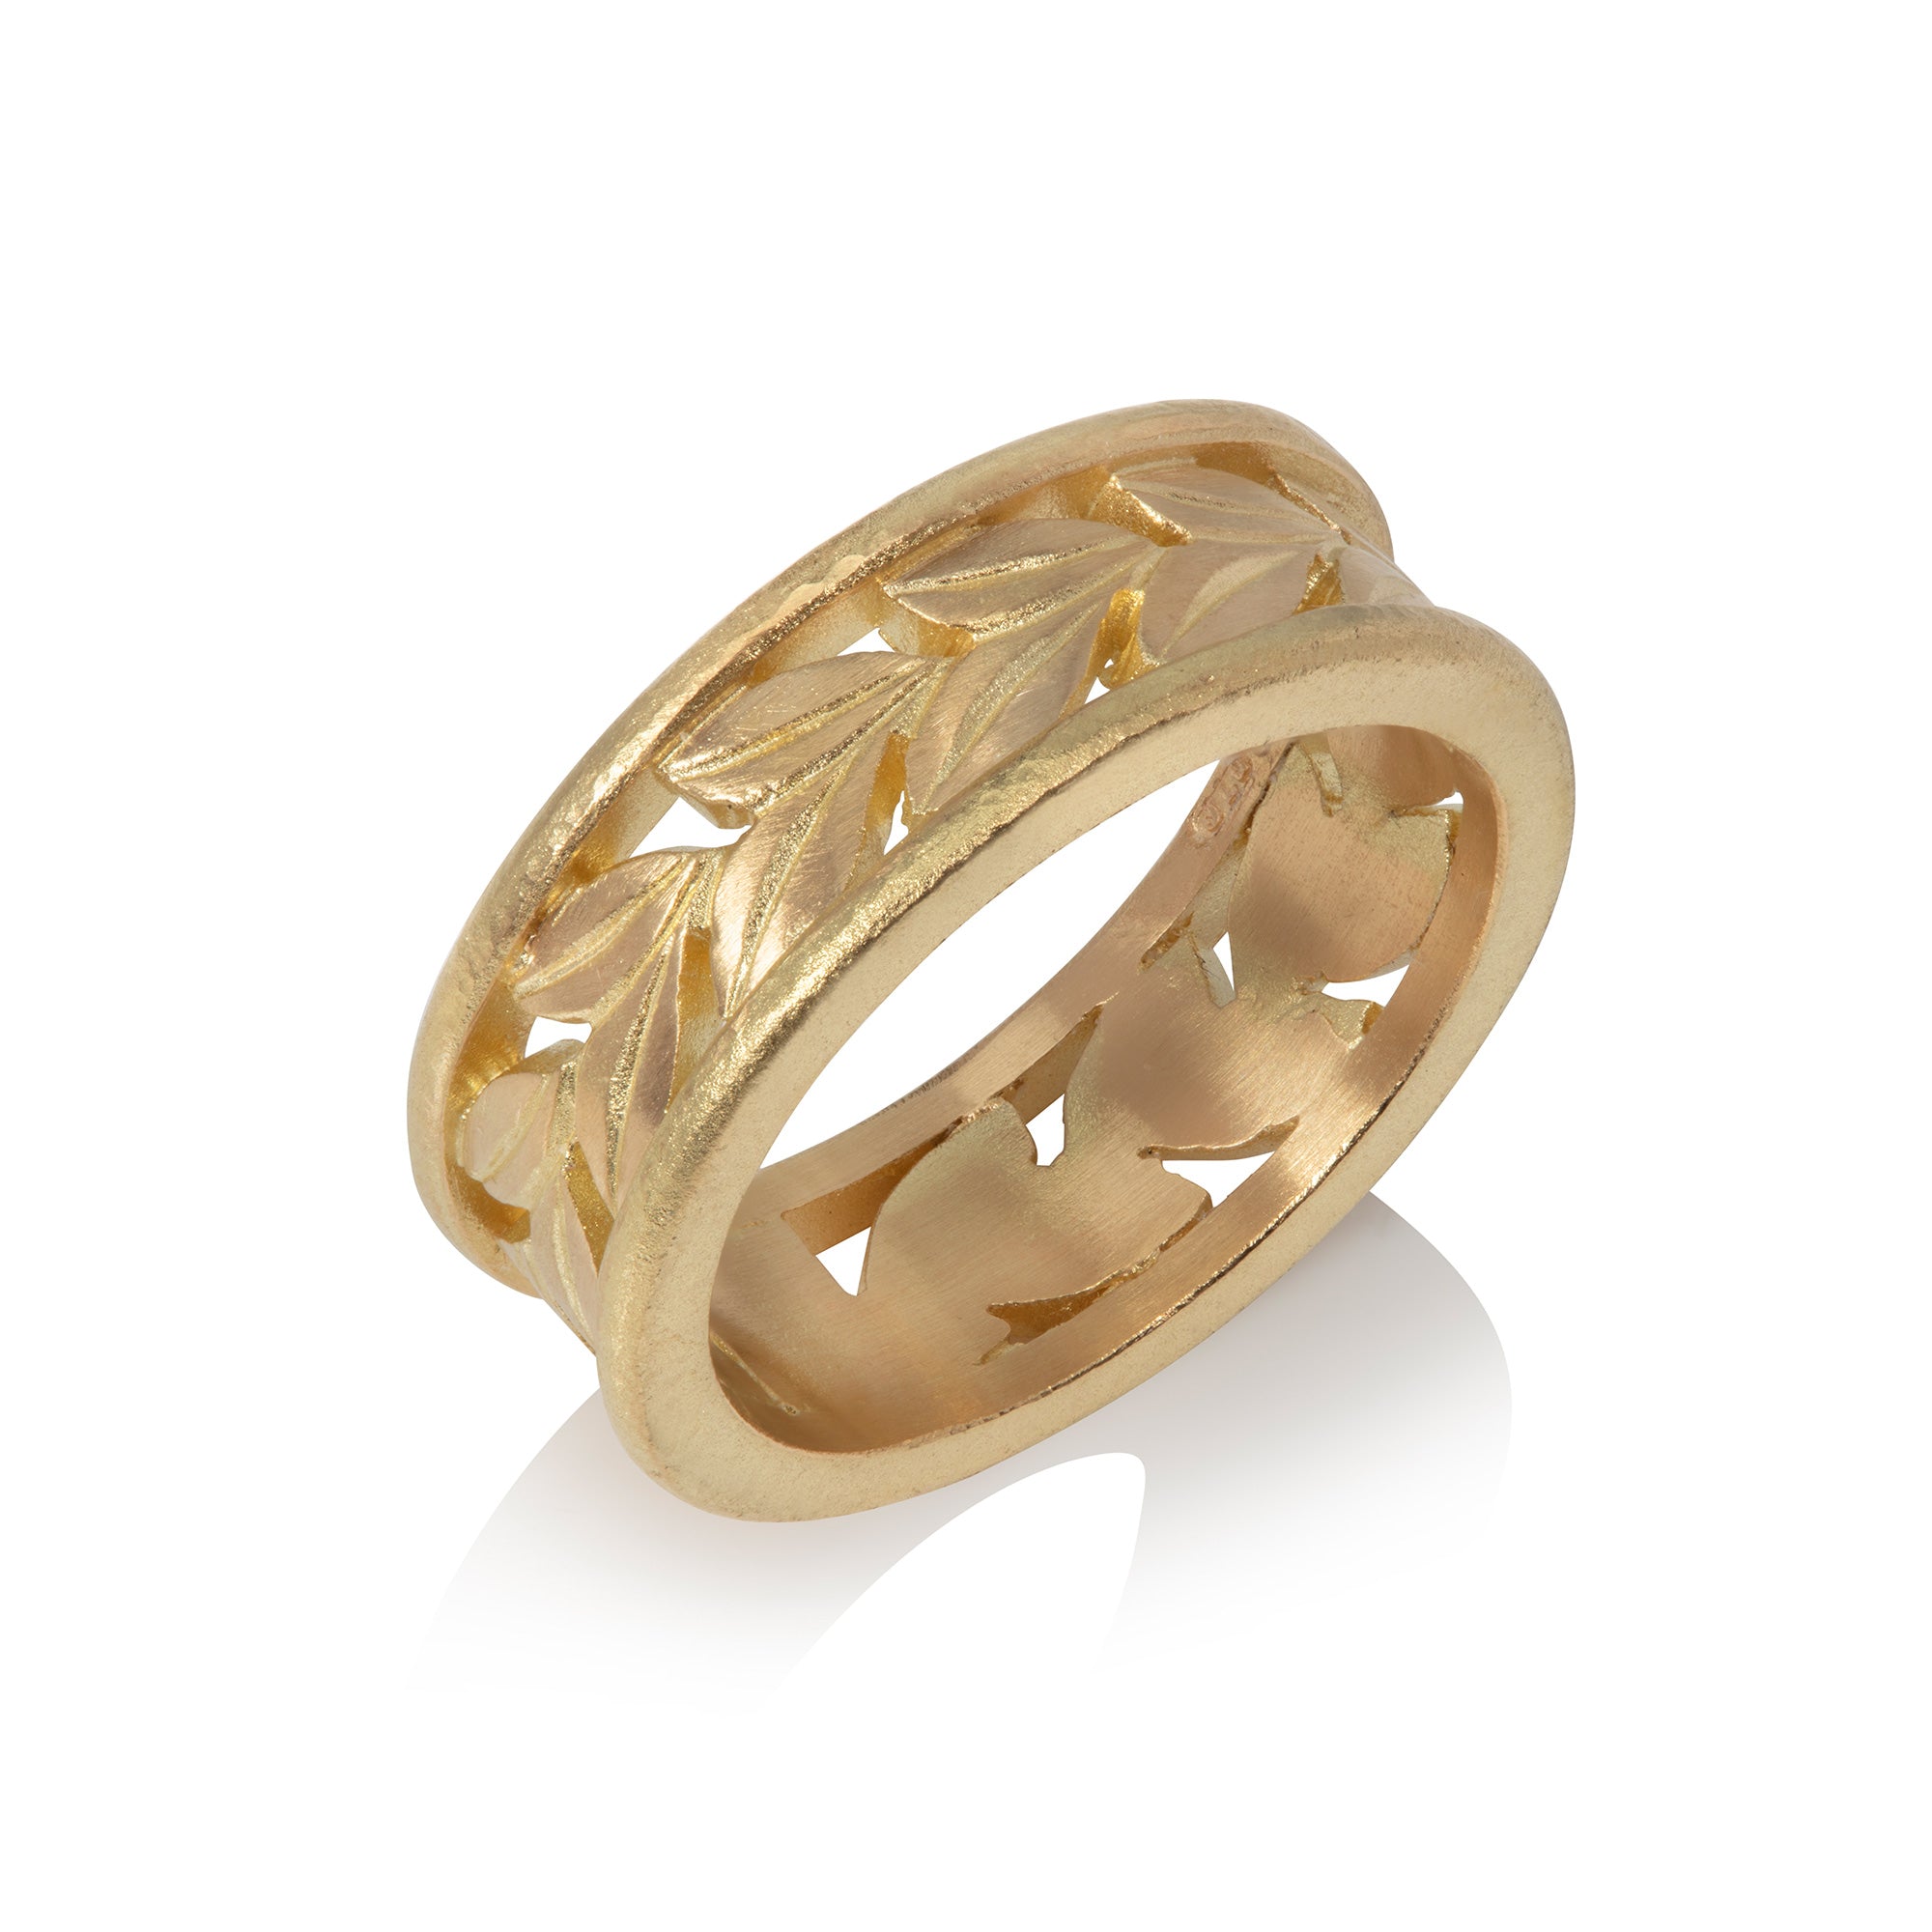 Yellow Gold Leaf Ring on white background